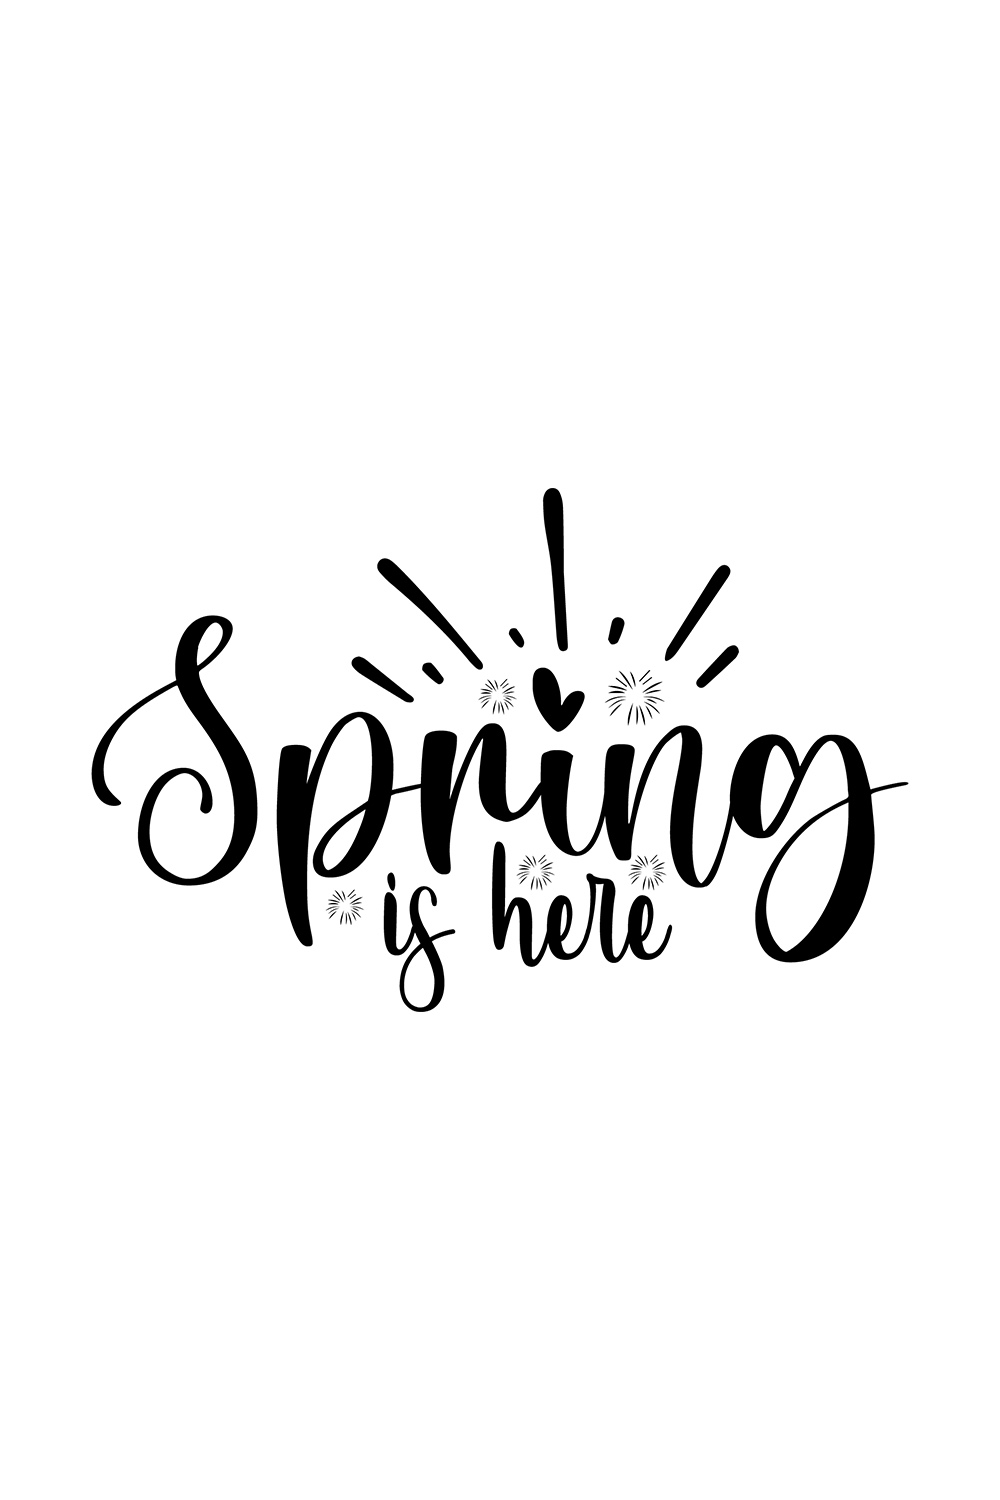 T-shirt Typography Spring Is Here SVG Design pinterest image.